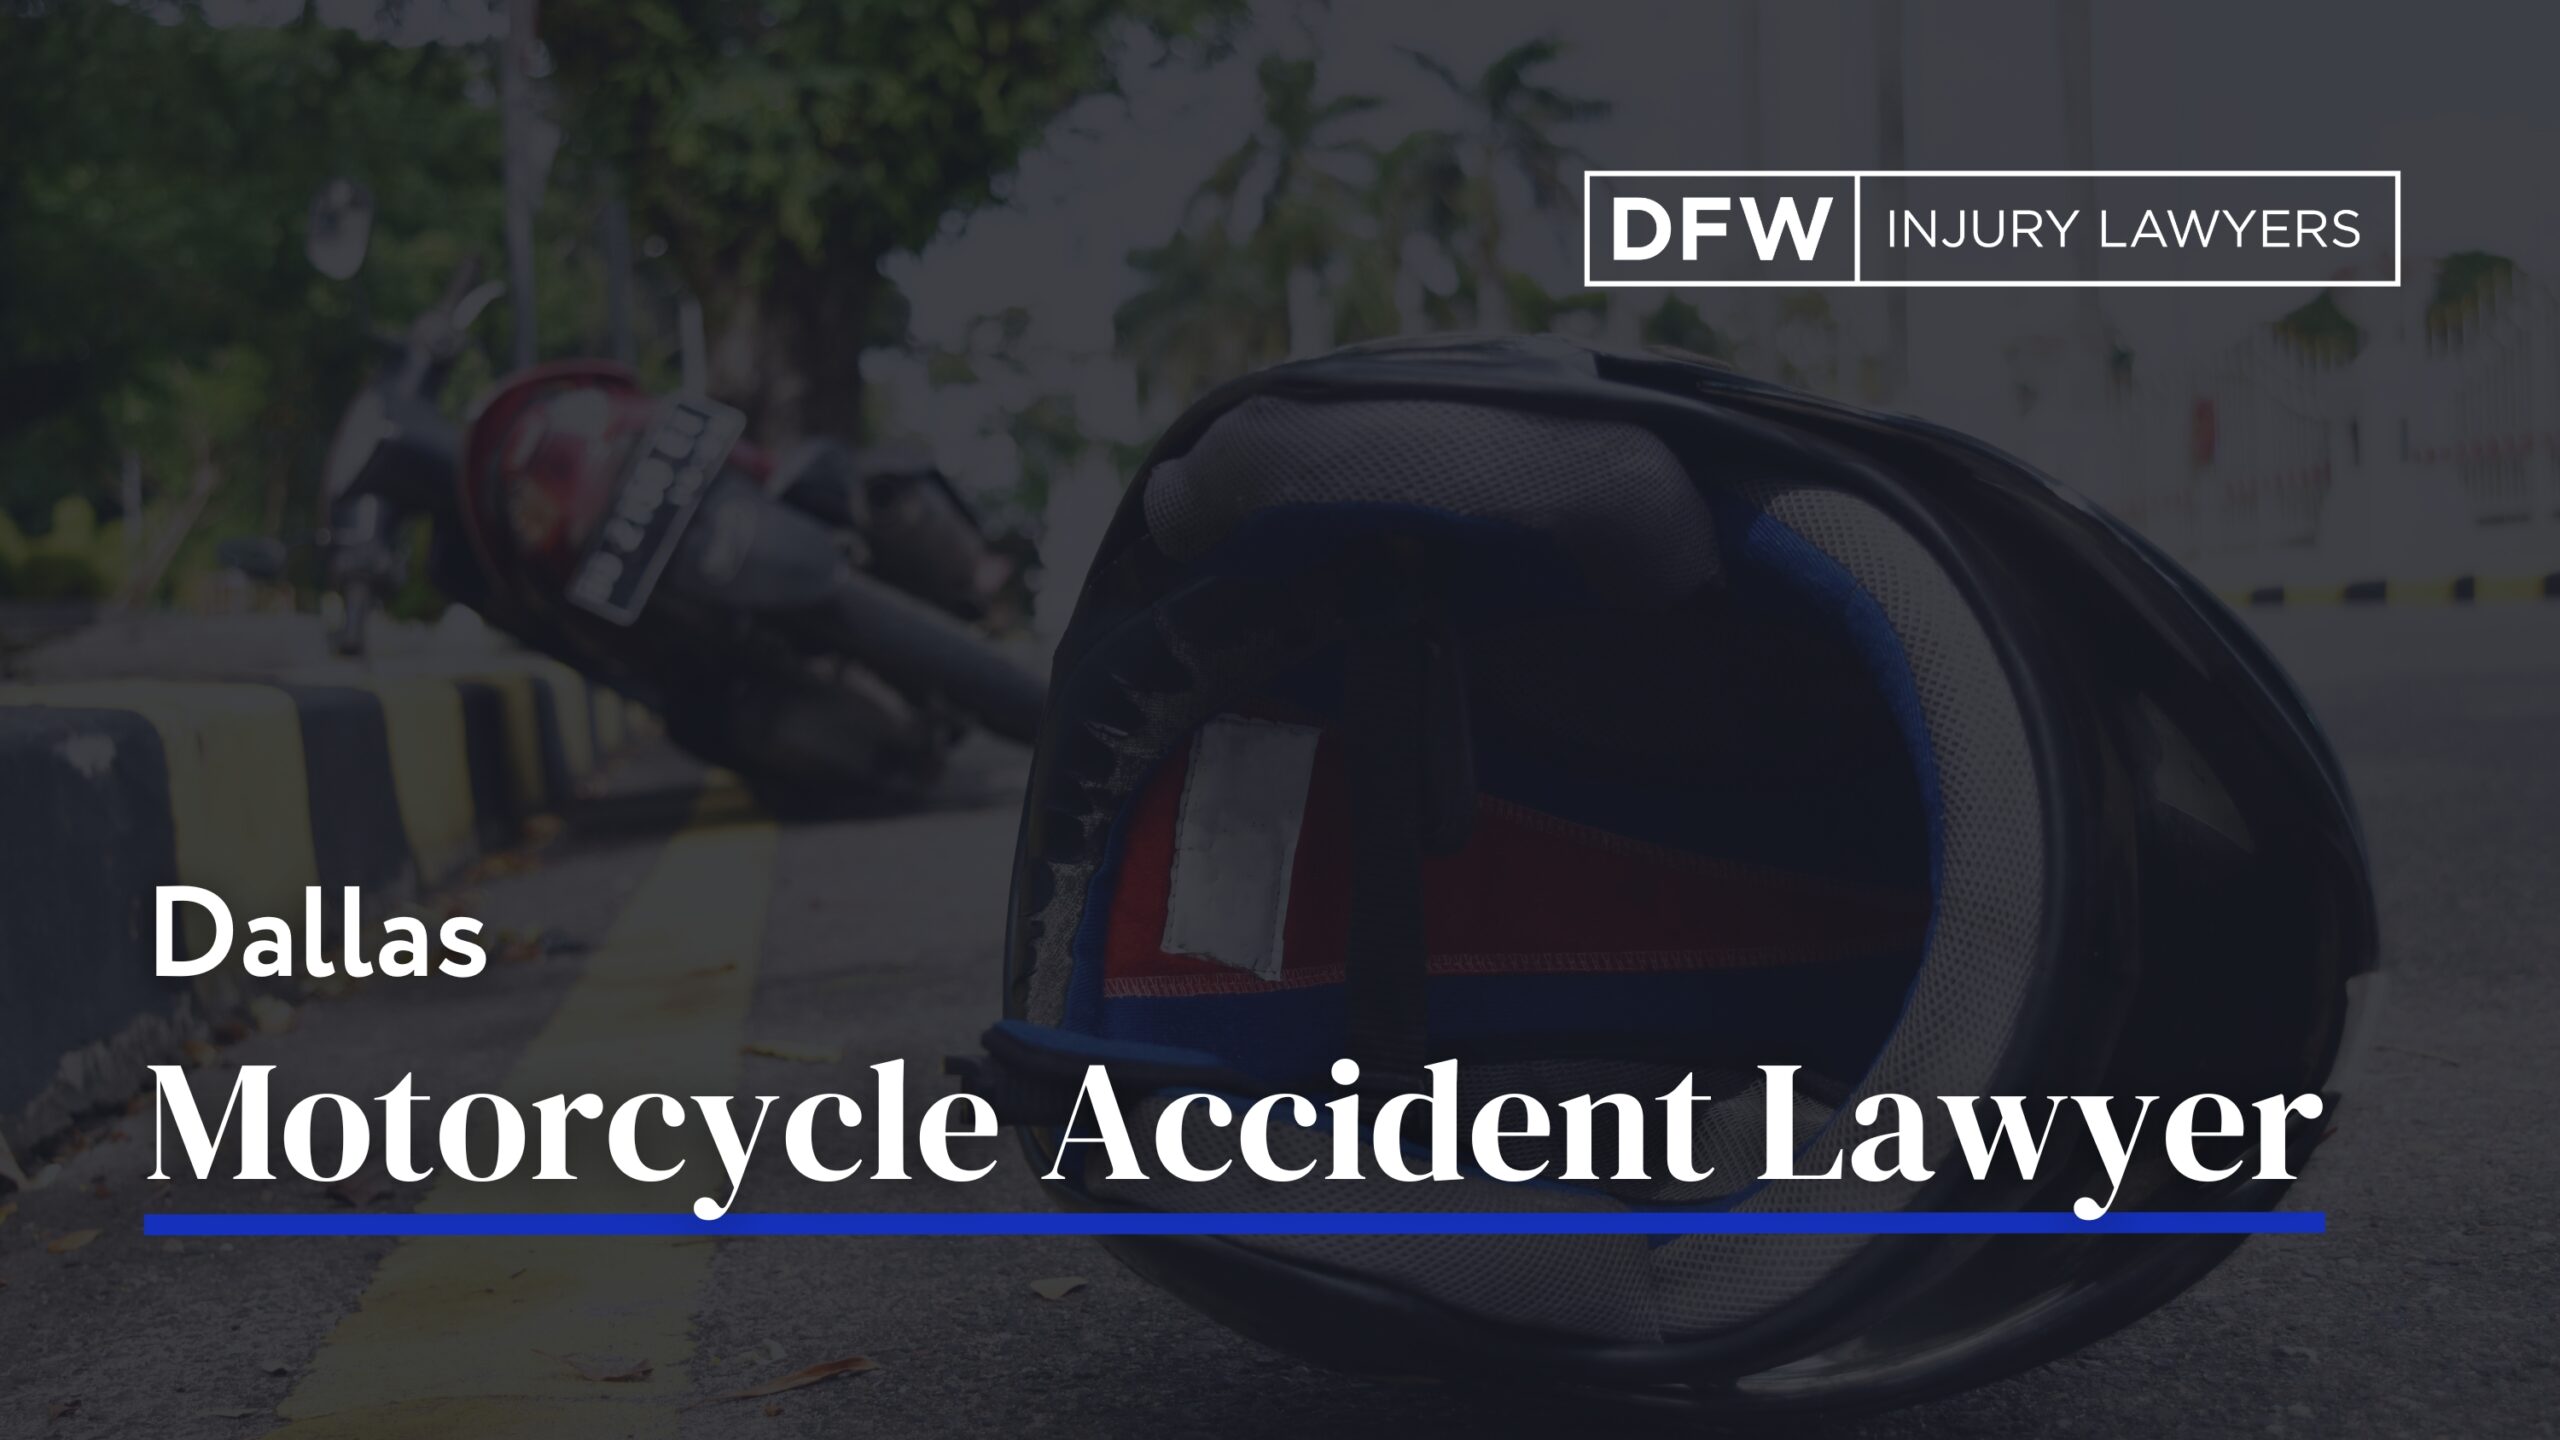 Dallas Motorcycle Accident Lawyer - DFW